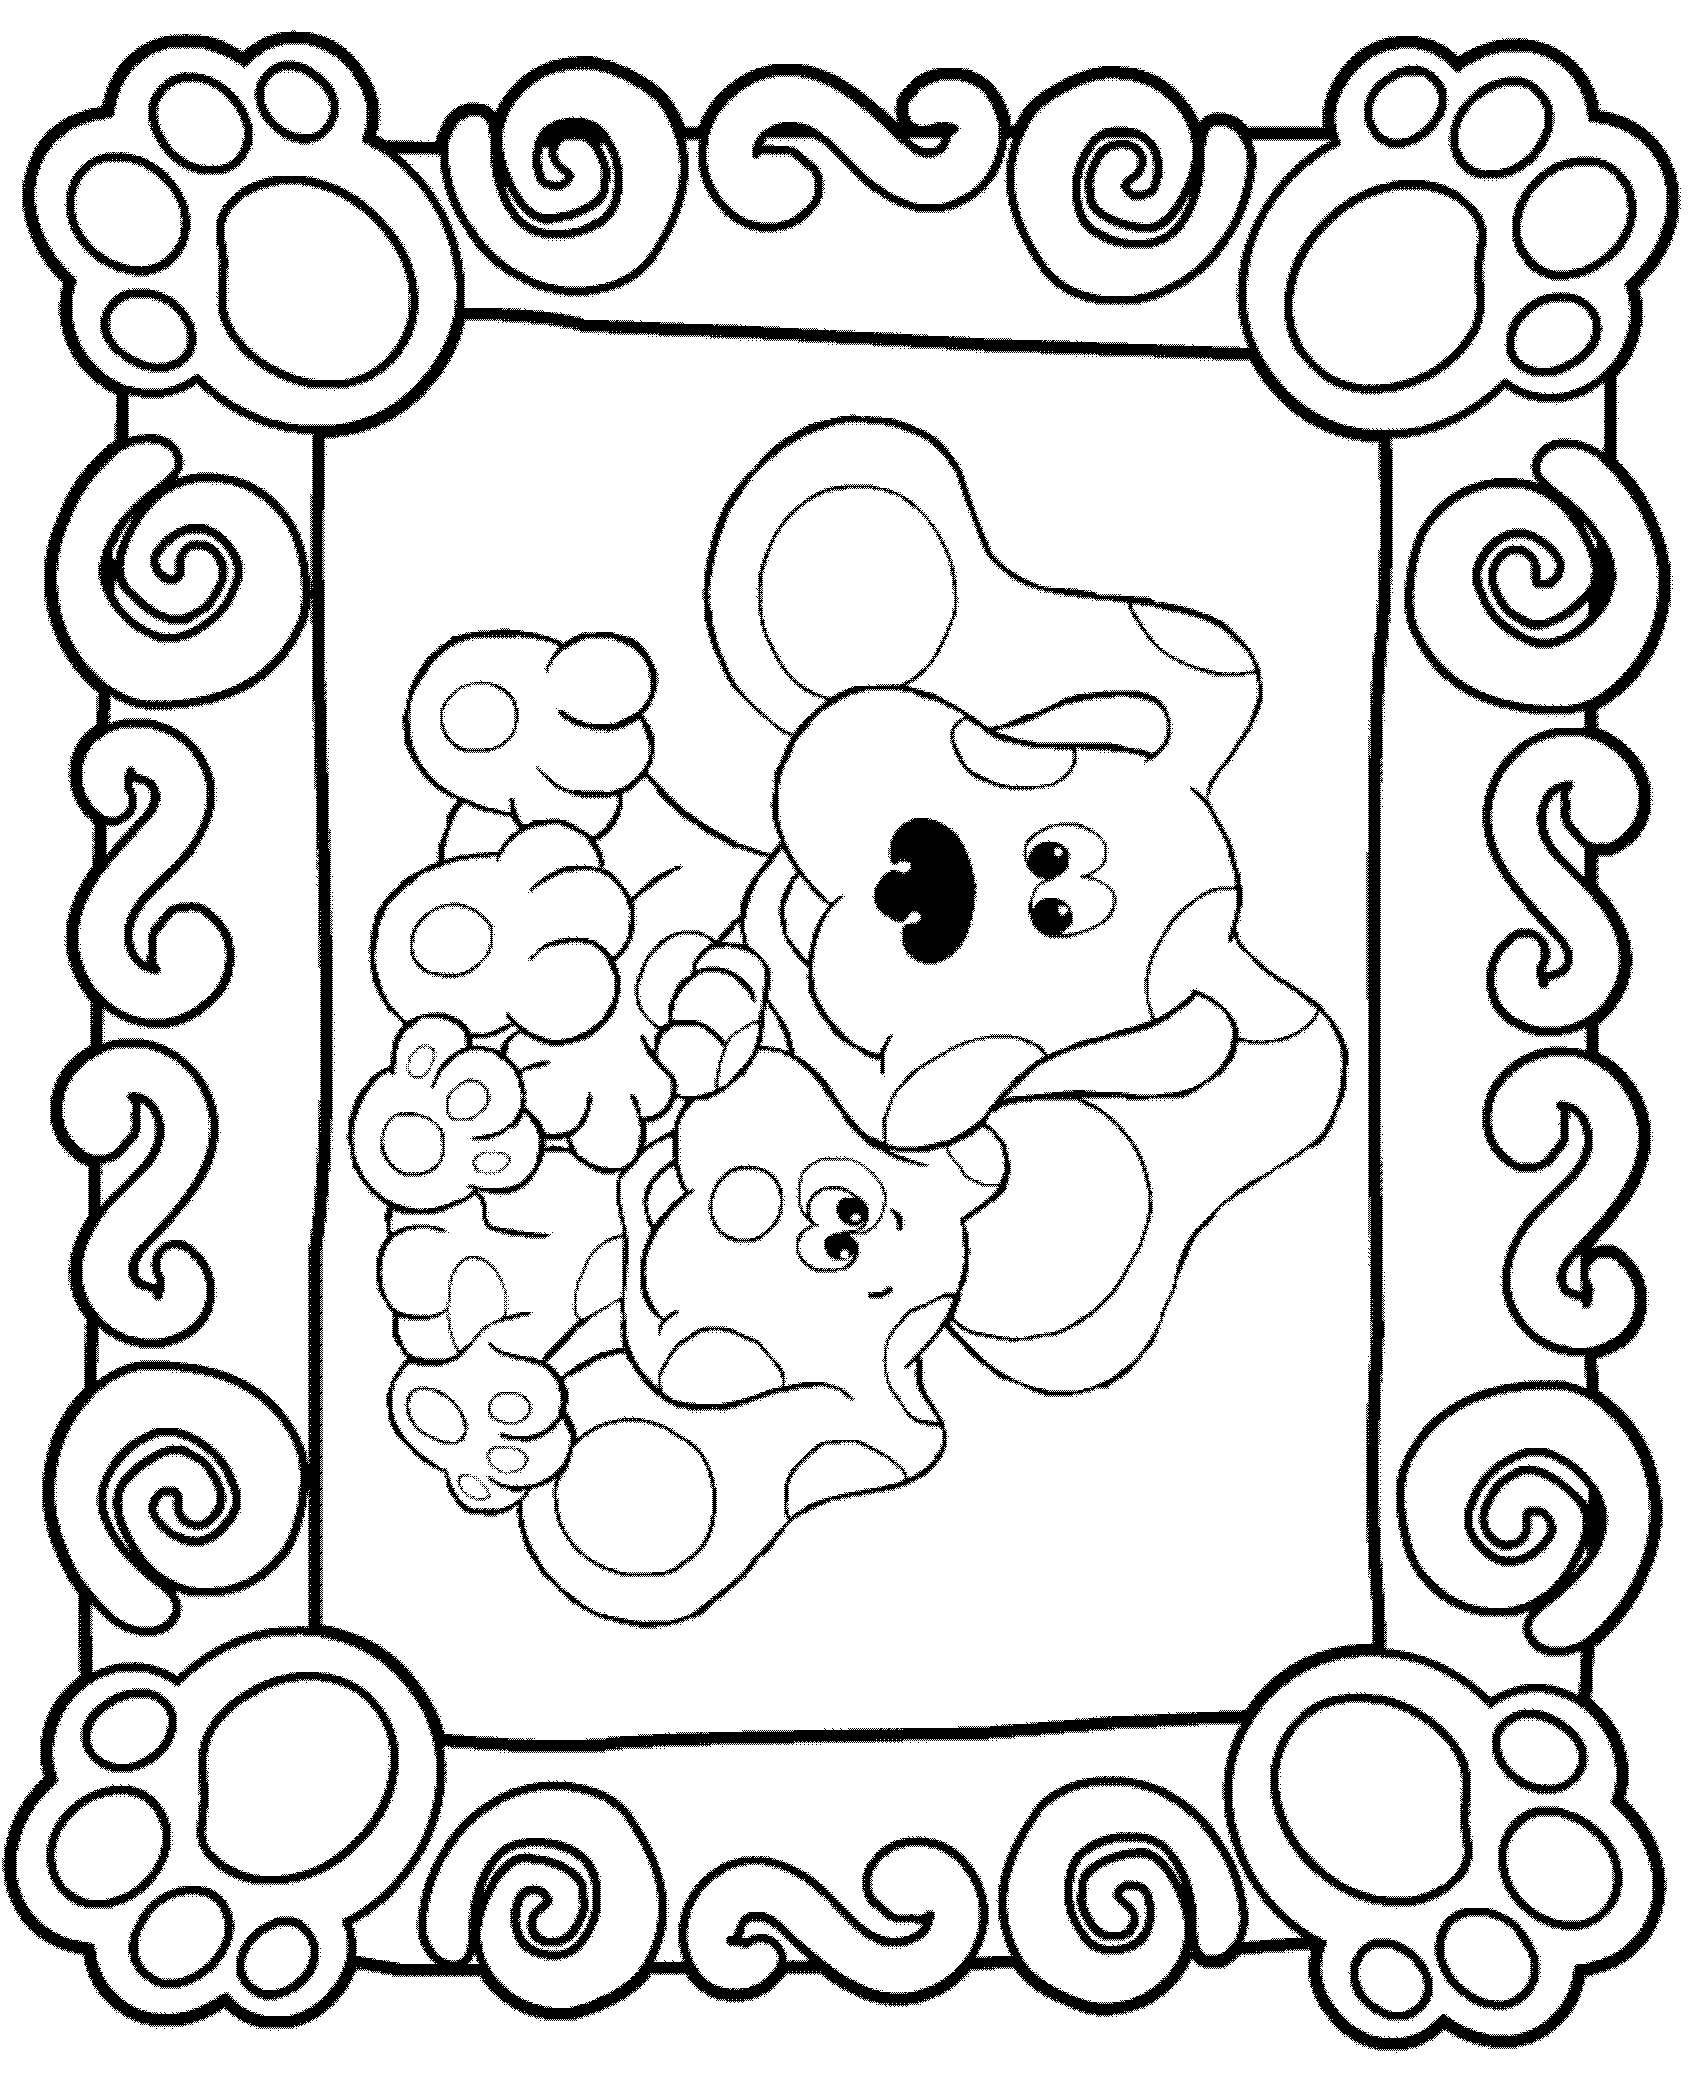 15 blues clues Coloring pages